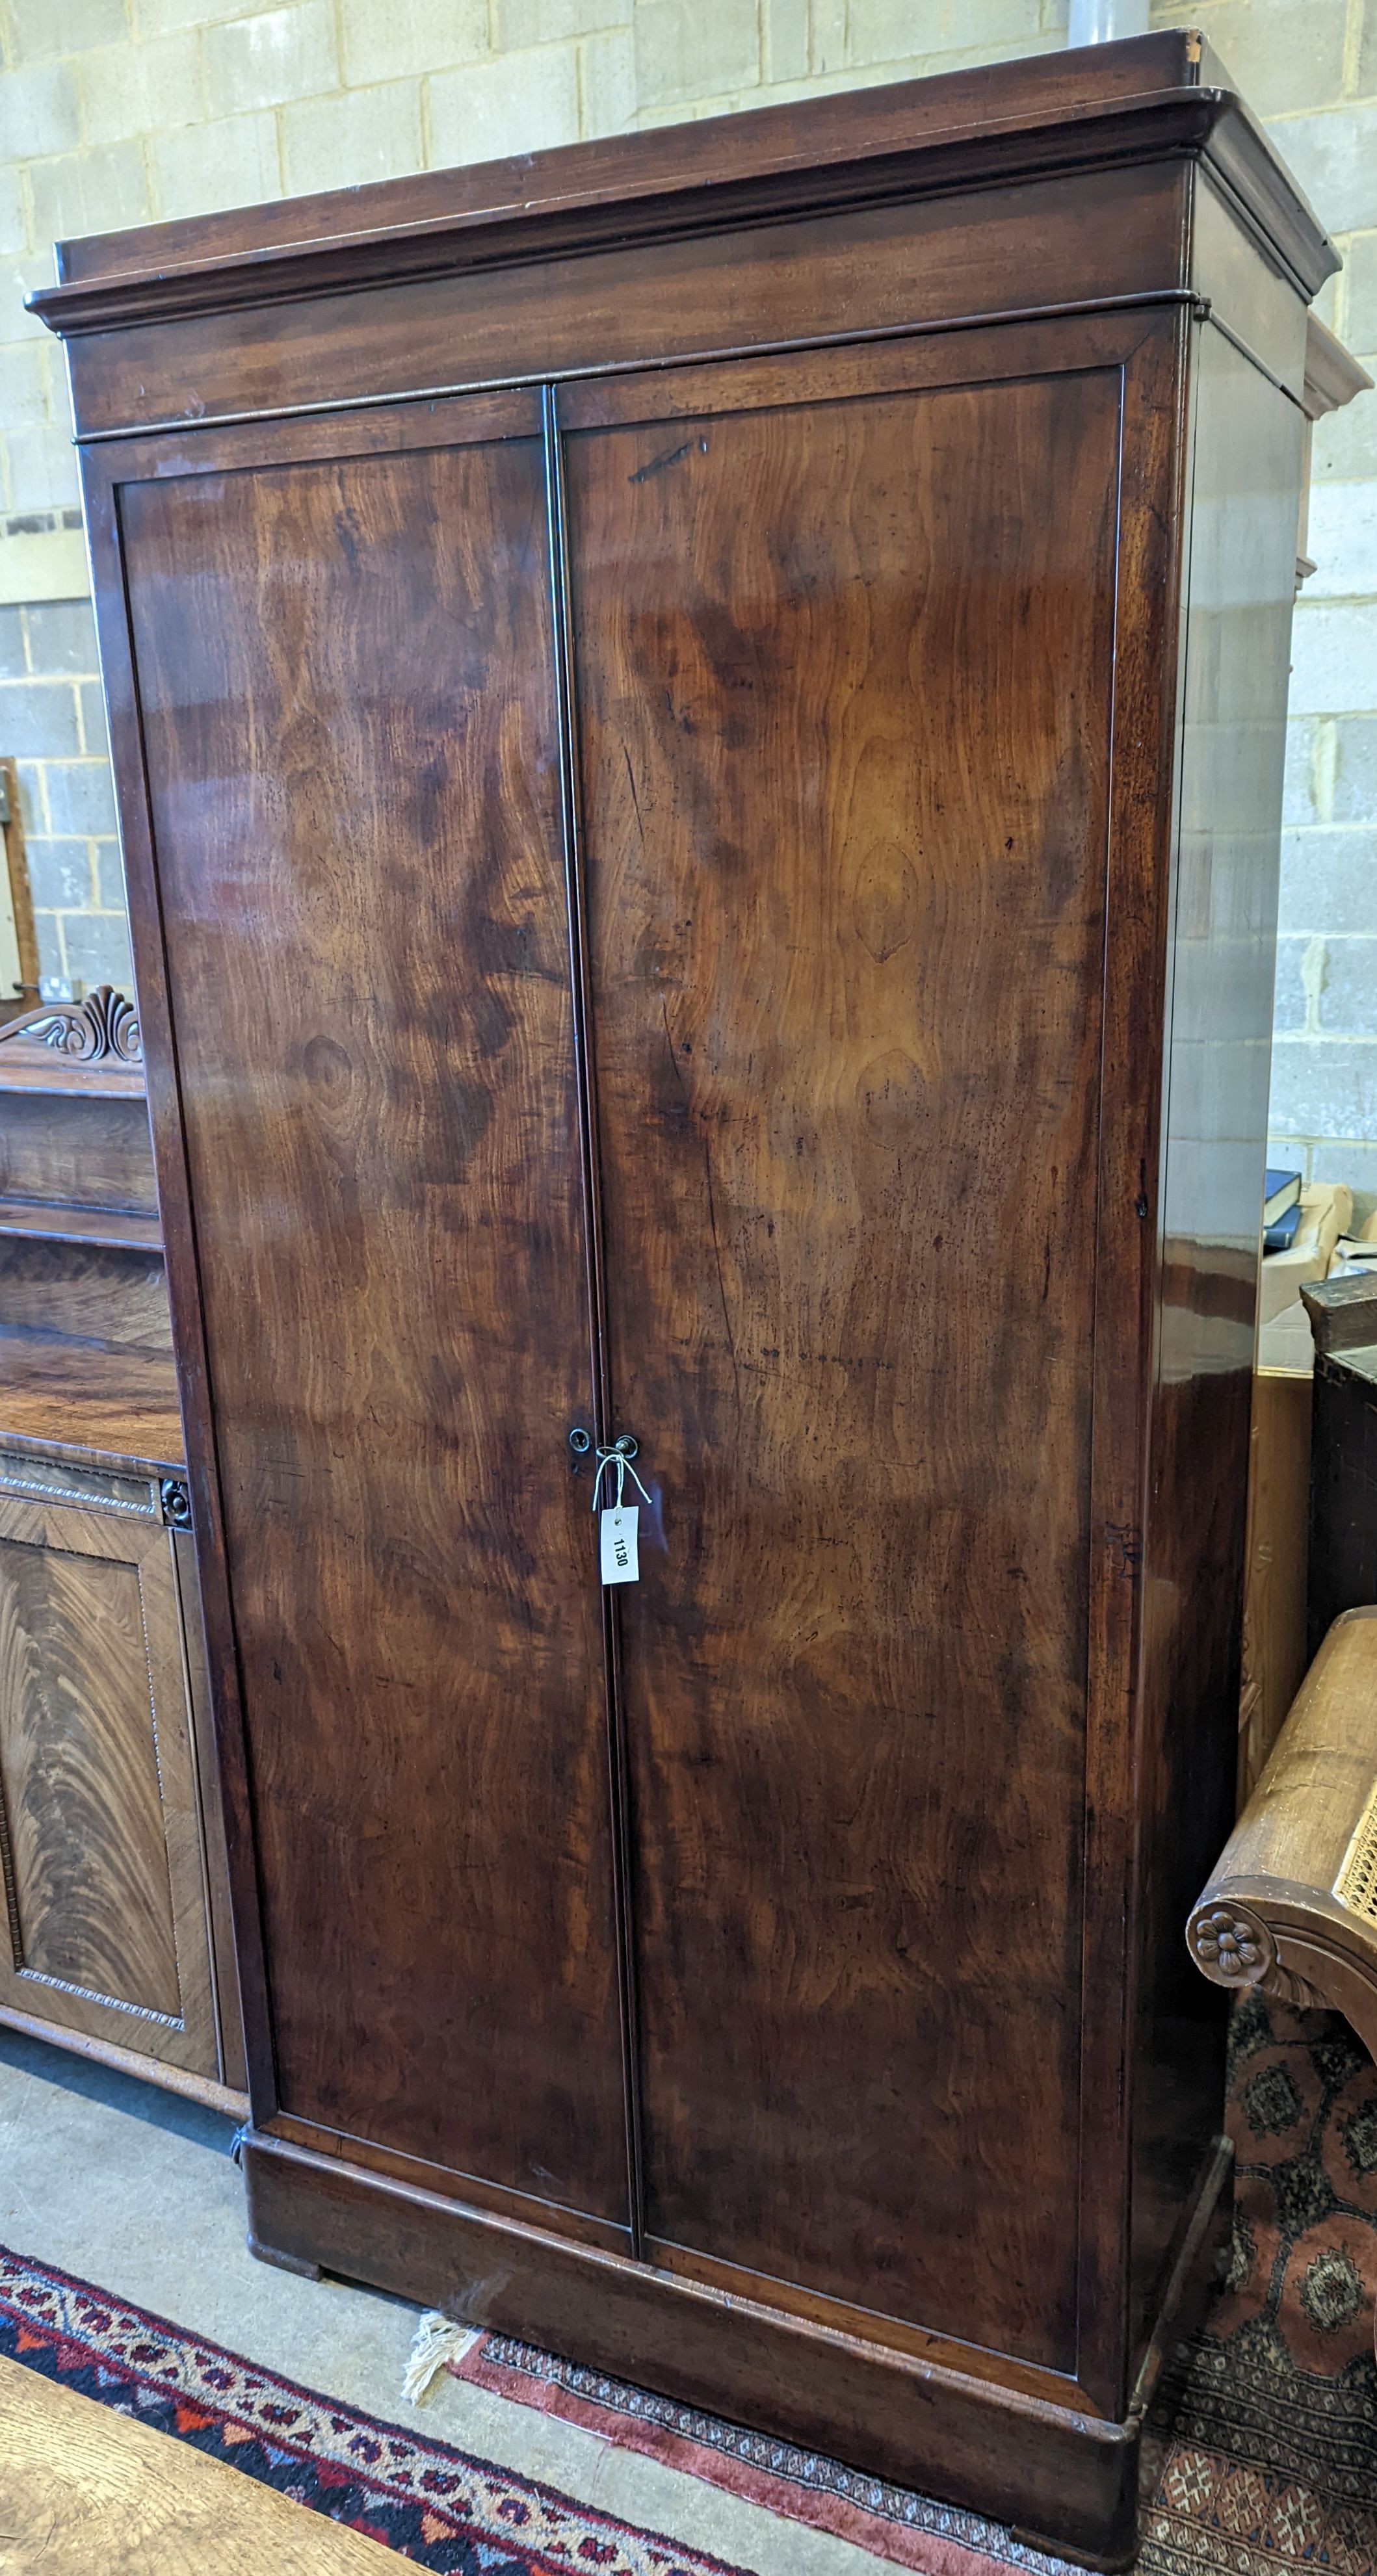 A 19th century French mahogany armoire, width 108cm, depth 47cm, height 213cm